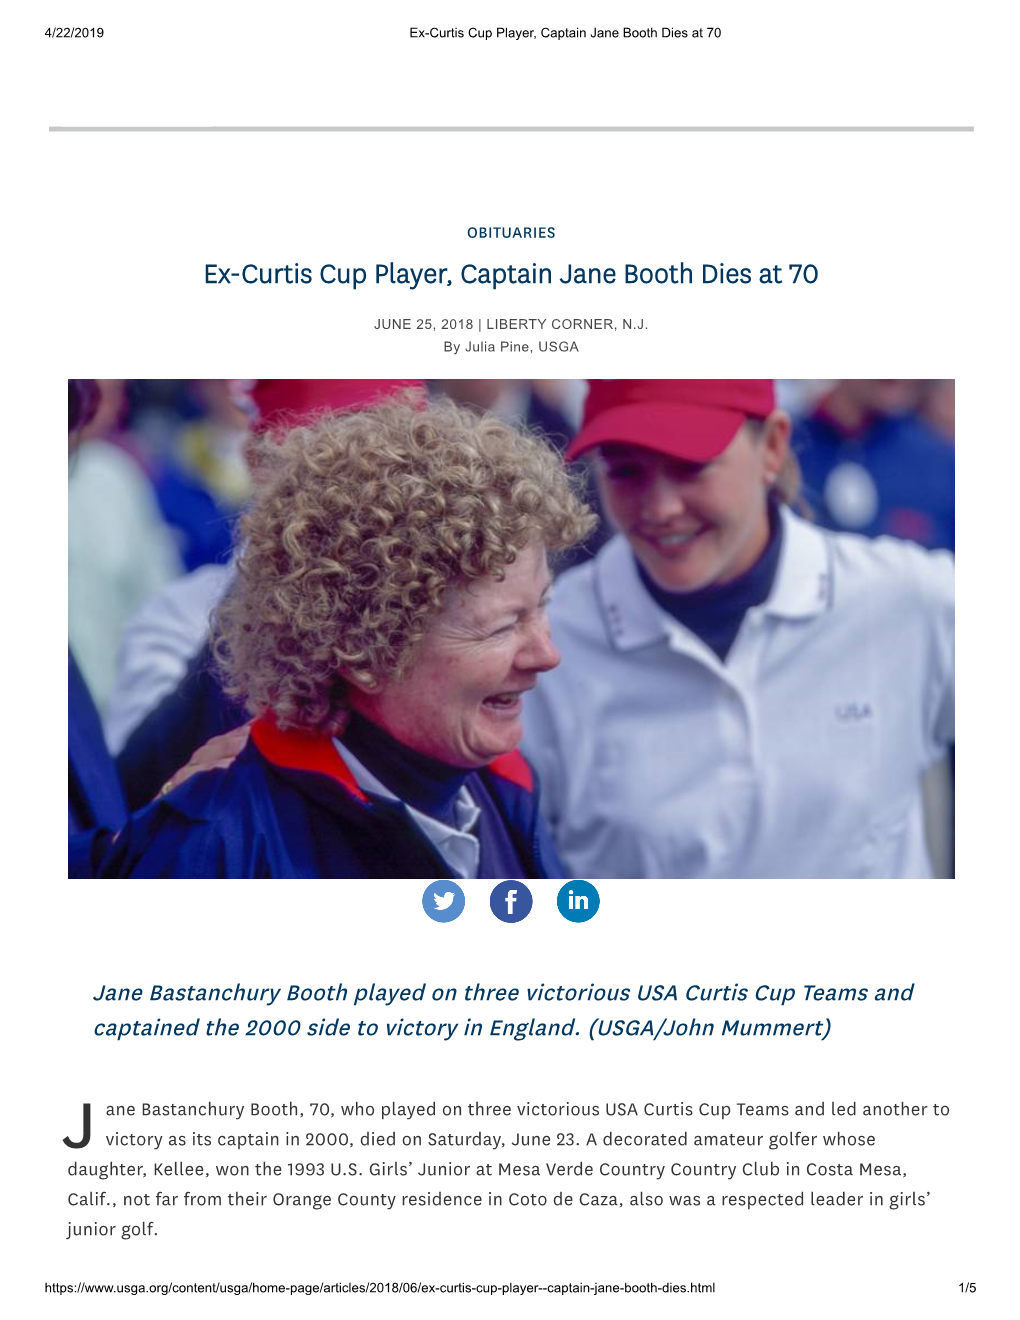 Ex-Curtis Cup Player, Captain Jane Booth Dies at 70